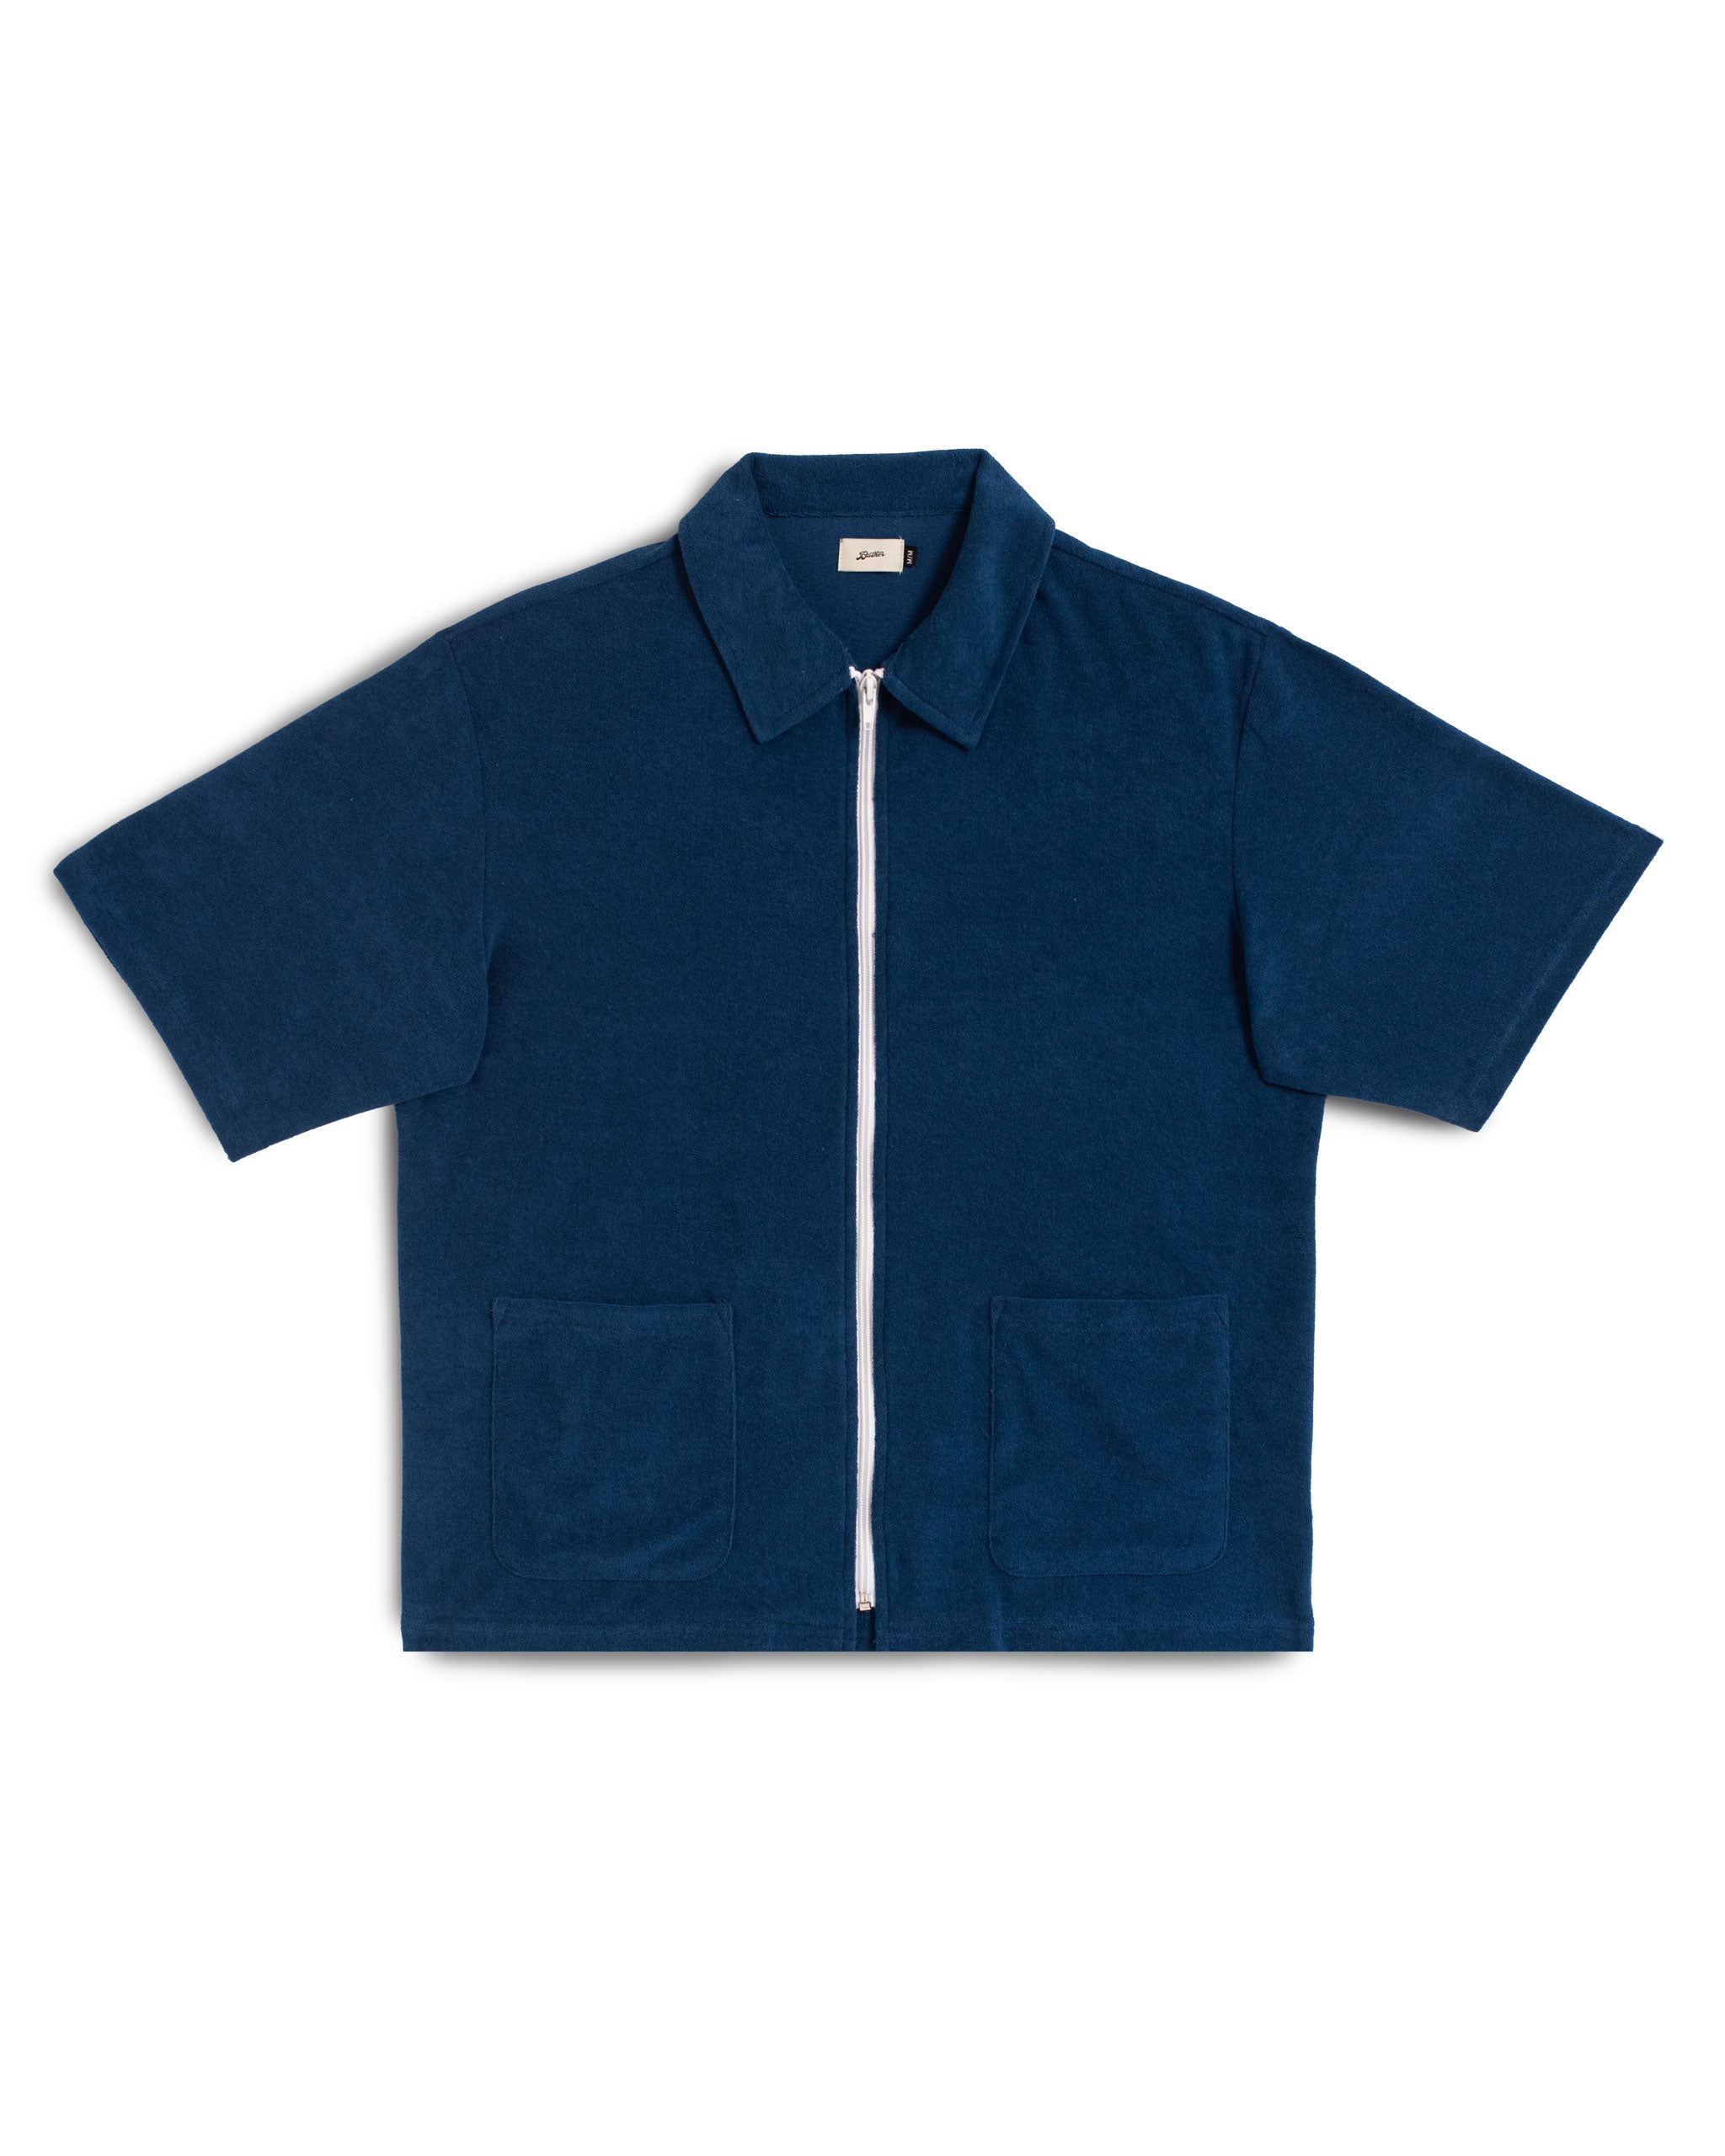 Solid Navy Towel Terry Cotton Full Zip Polo Shirt